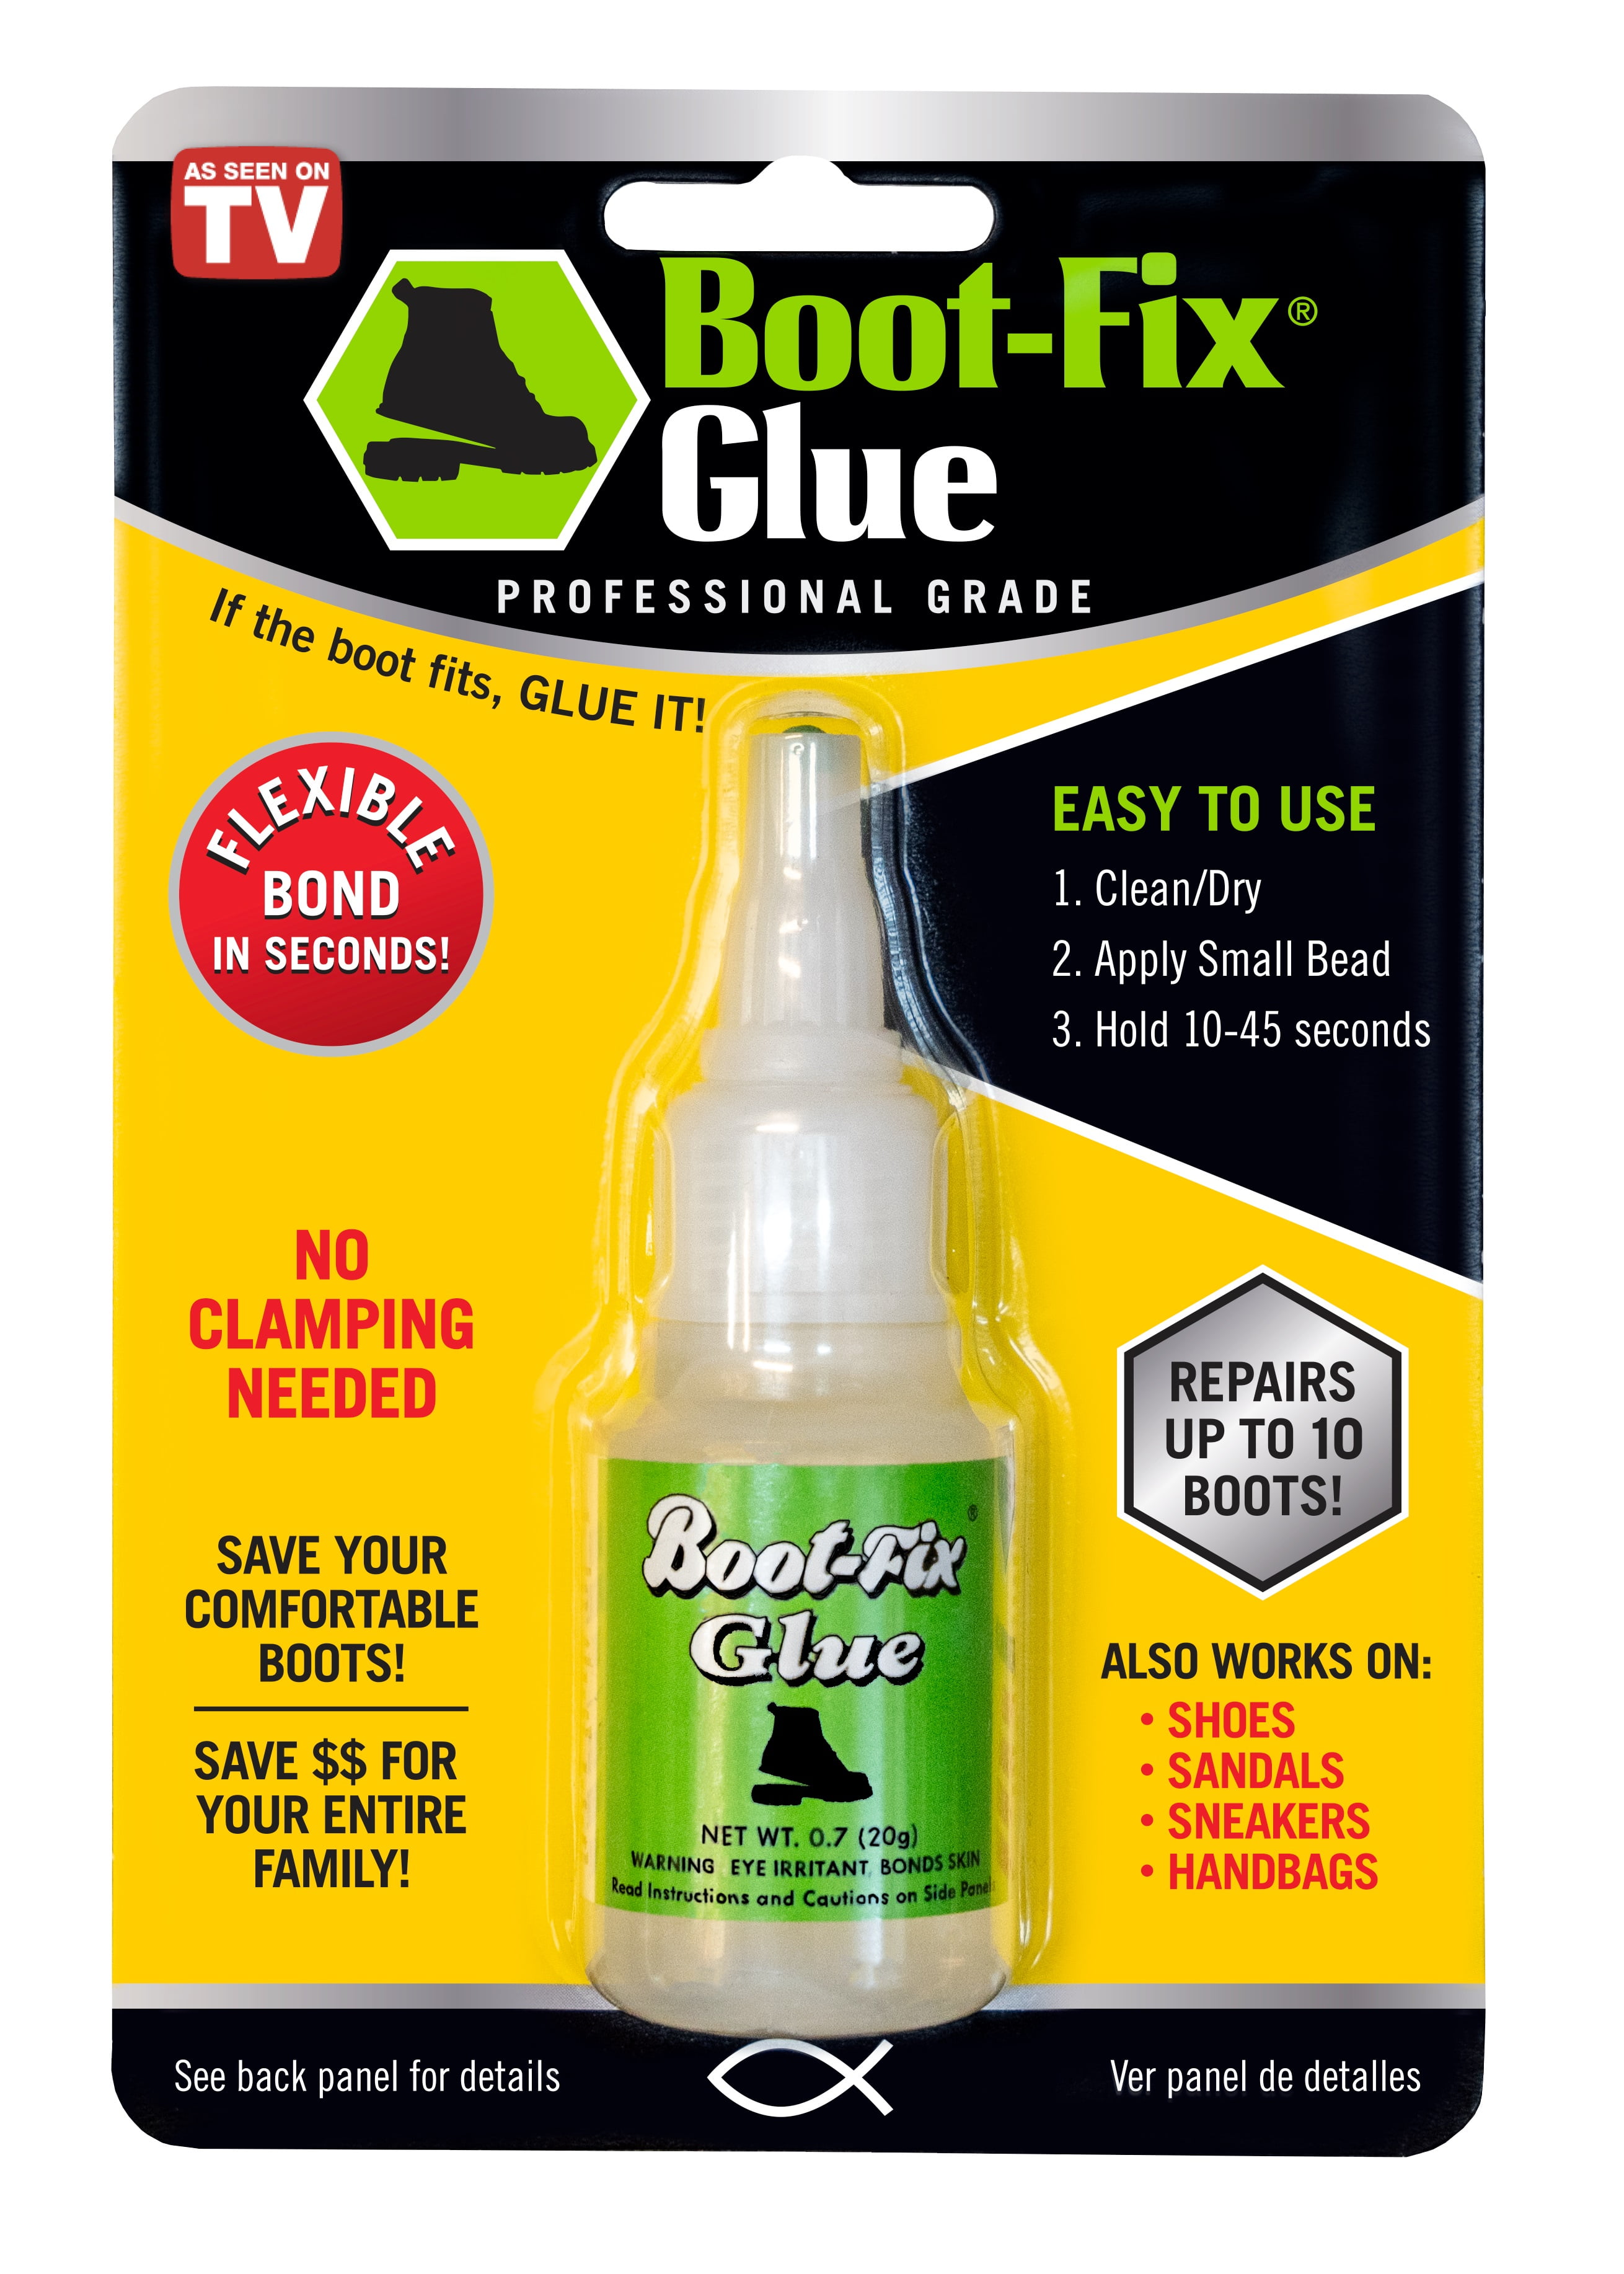 Rubber Shoe Adhesive Glue, Rubber Office Home Glue